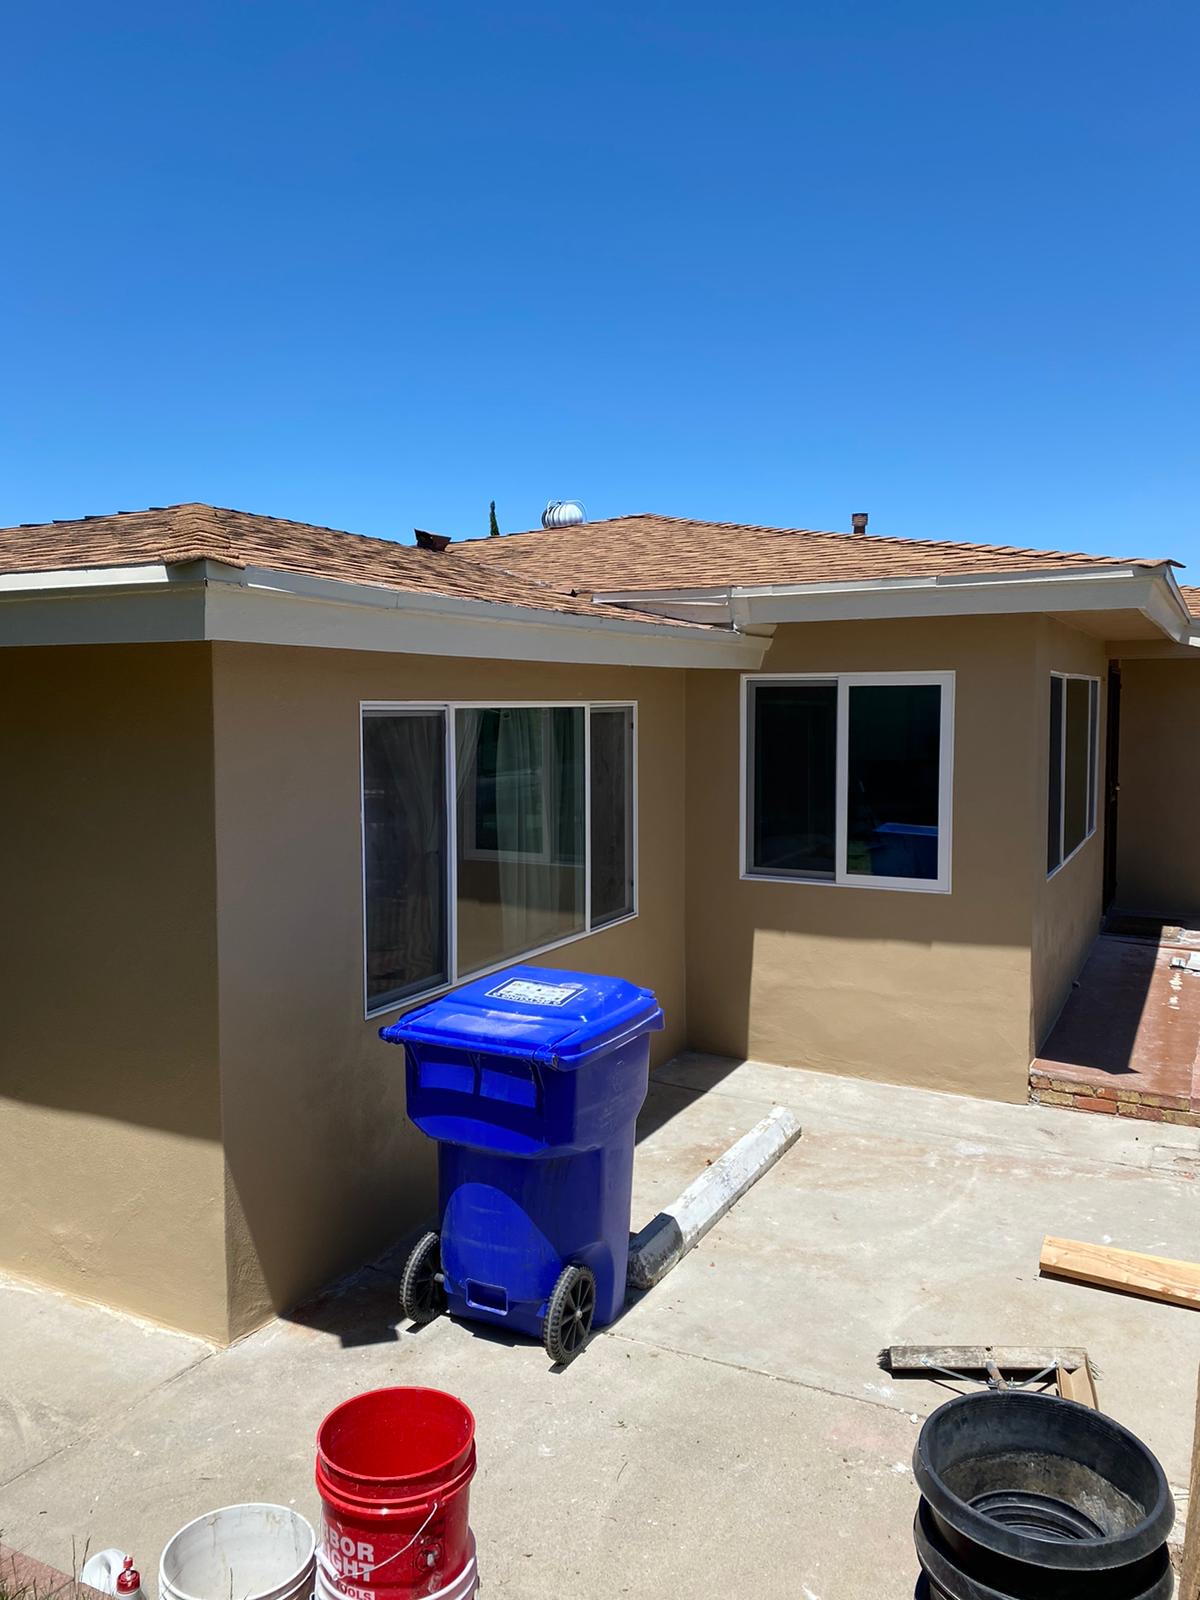 House Painting project in San Diego 92115